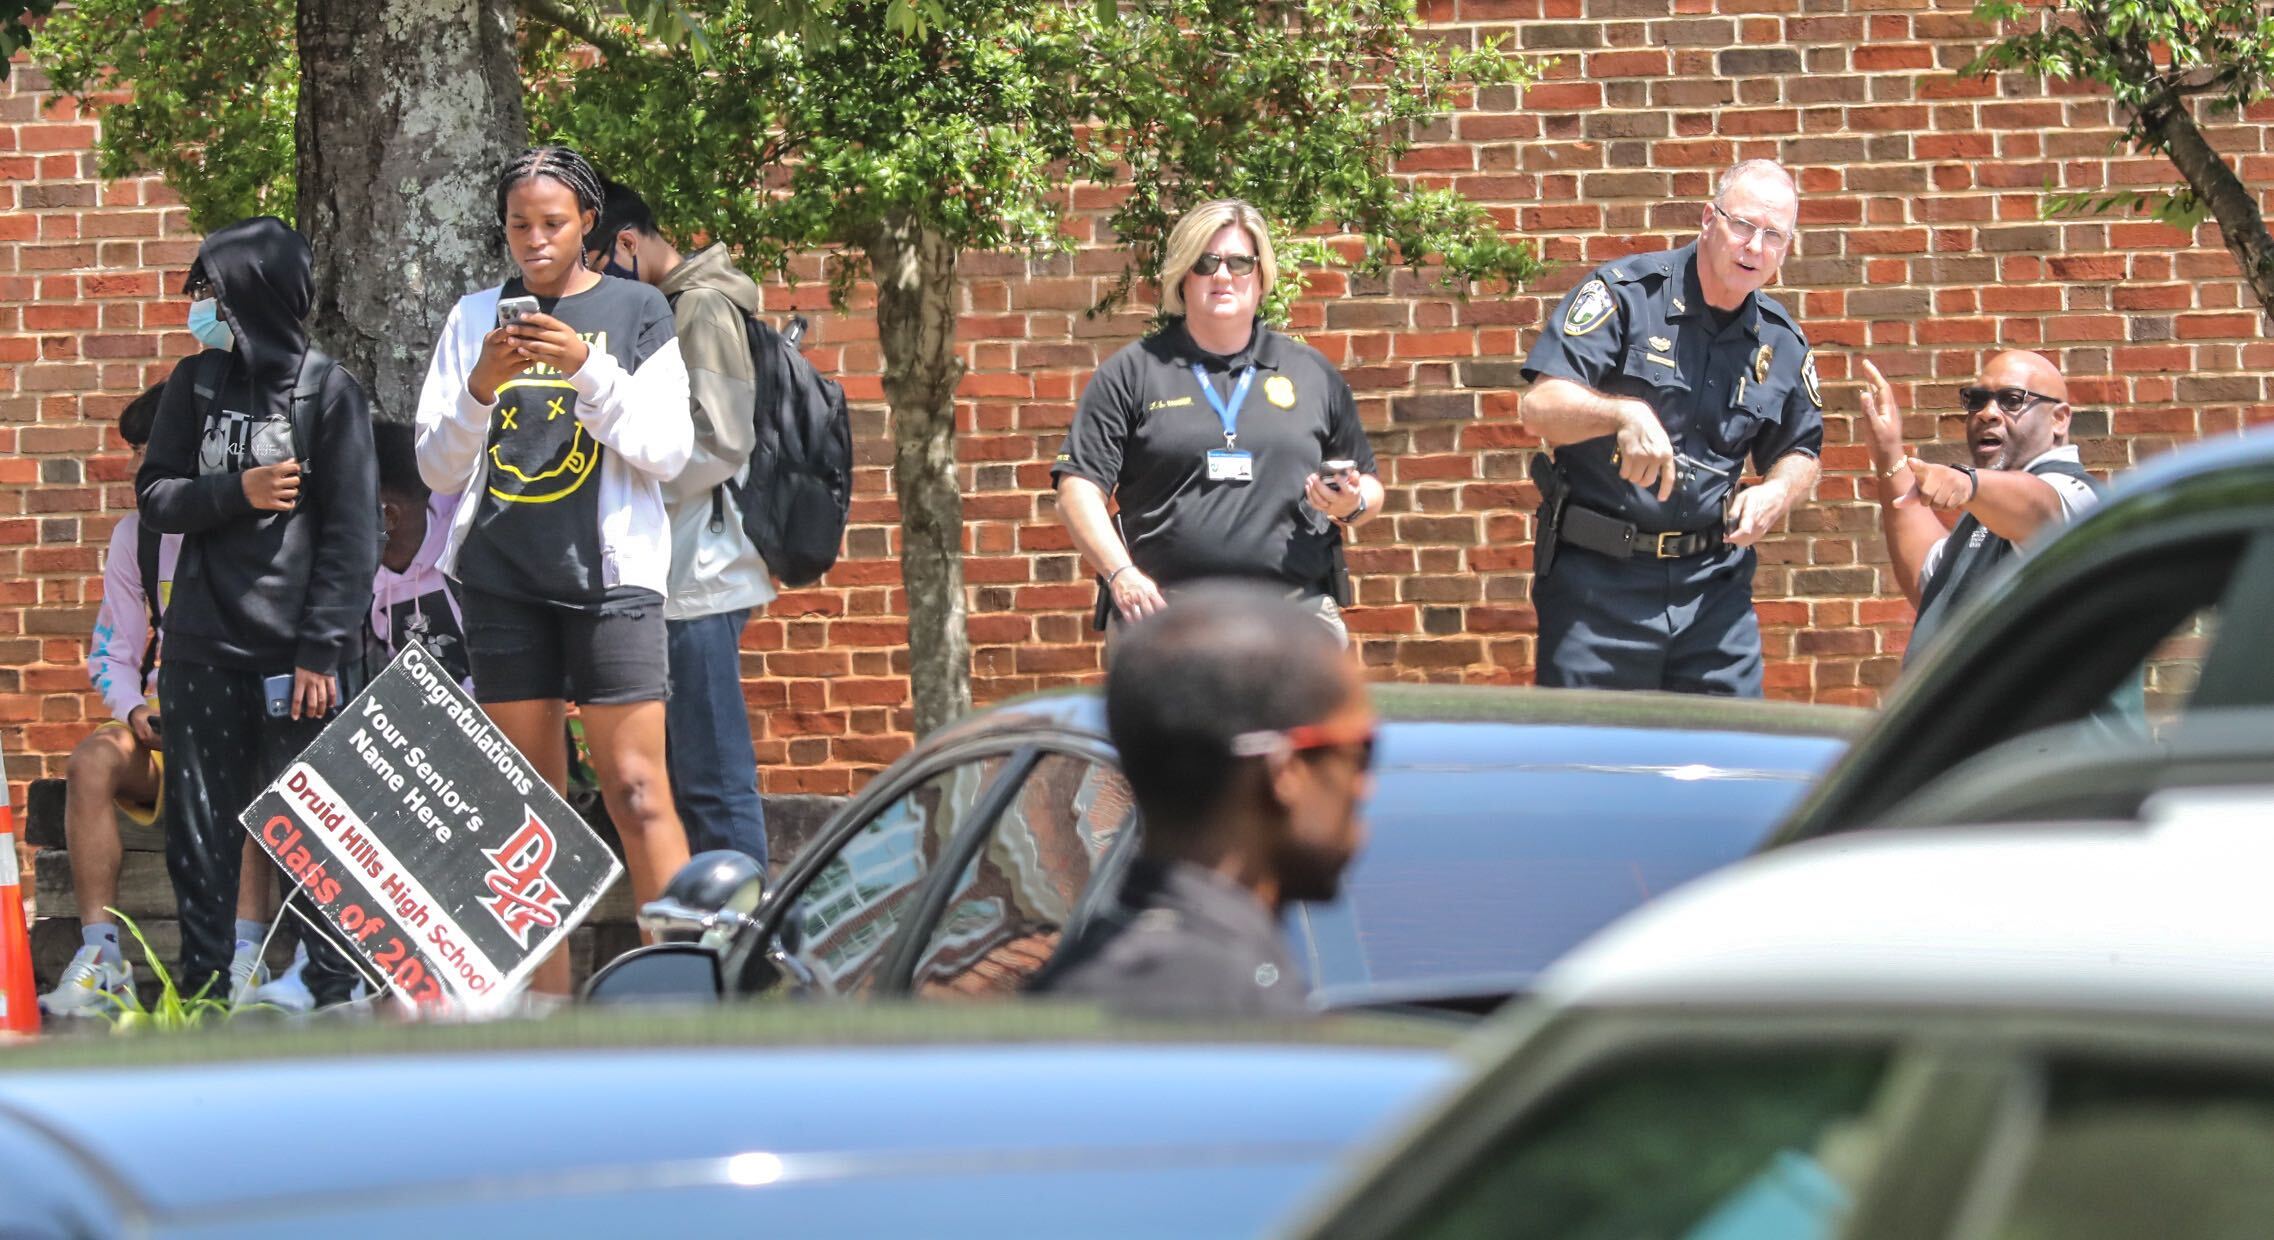 No active shooting': Dunwoody police investigating report of armed